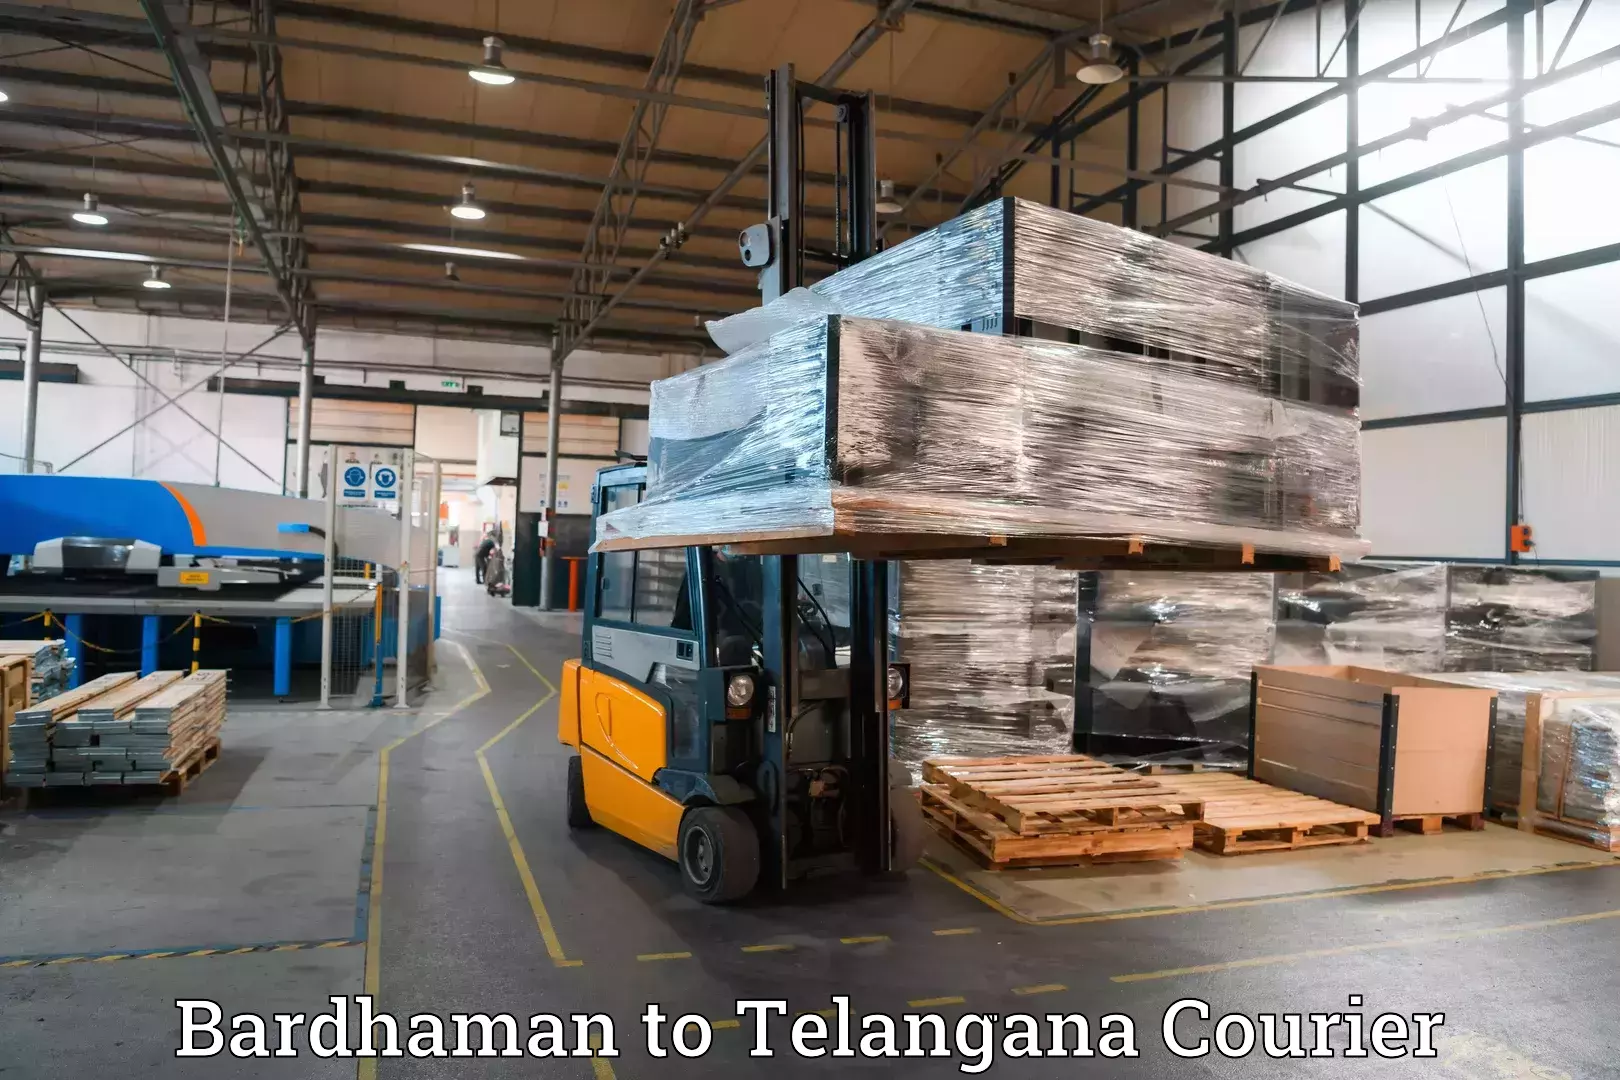 Luggage transport solutions Bardhaman to Odela